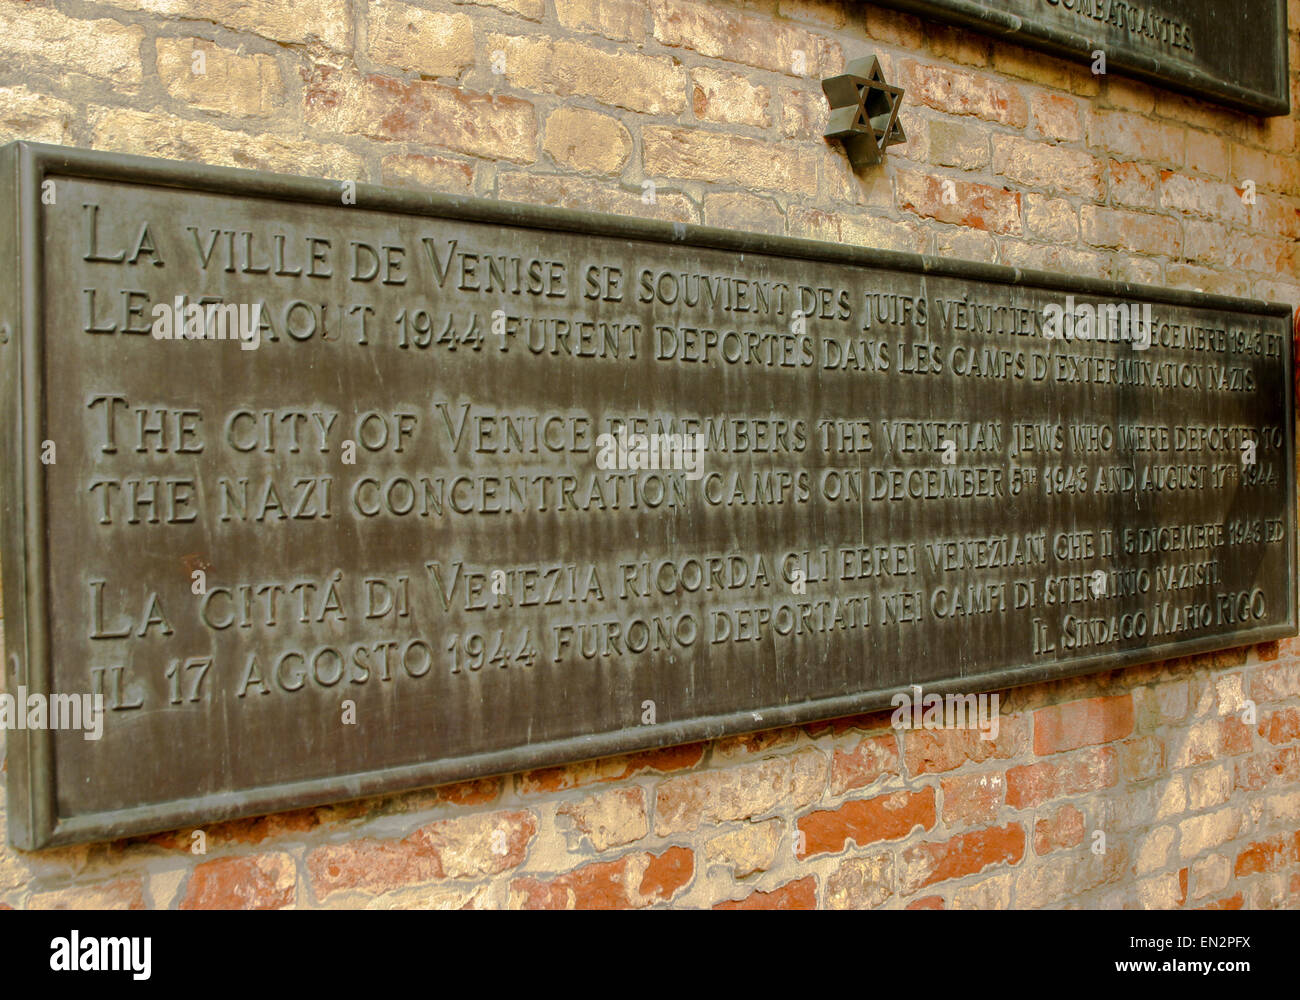 Venice, Province of Venice, ITALY. 7th Oct, 2004. A plaque on the wall of the Campo del Nuovo Ghetto, from the City of Venice, commemorates the night of Dec. 5, 1943, when the first 200 of the city's Jews were rounded up and marched out for deportation and death. Venice, a UNESCO World Heritage Site, is one of the most popular international tourist destinations. © Arnold Drapkin/ZUMA Wire/Alamy Live News Stock Photo